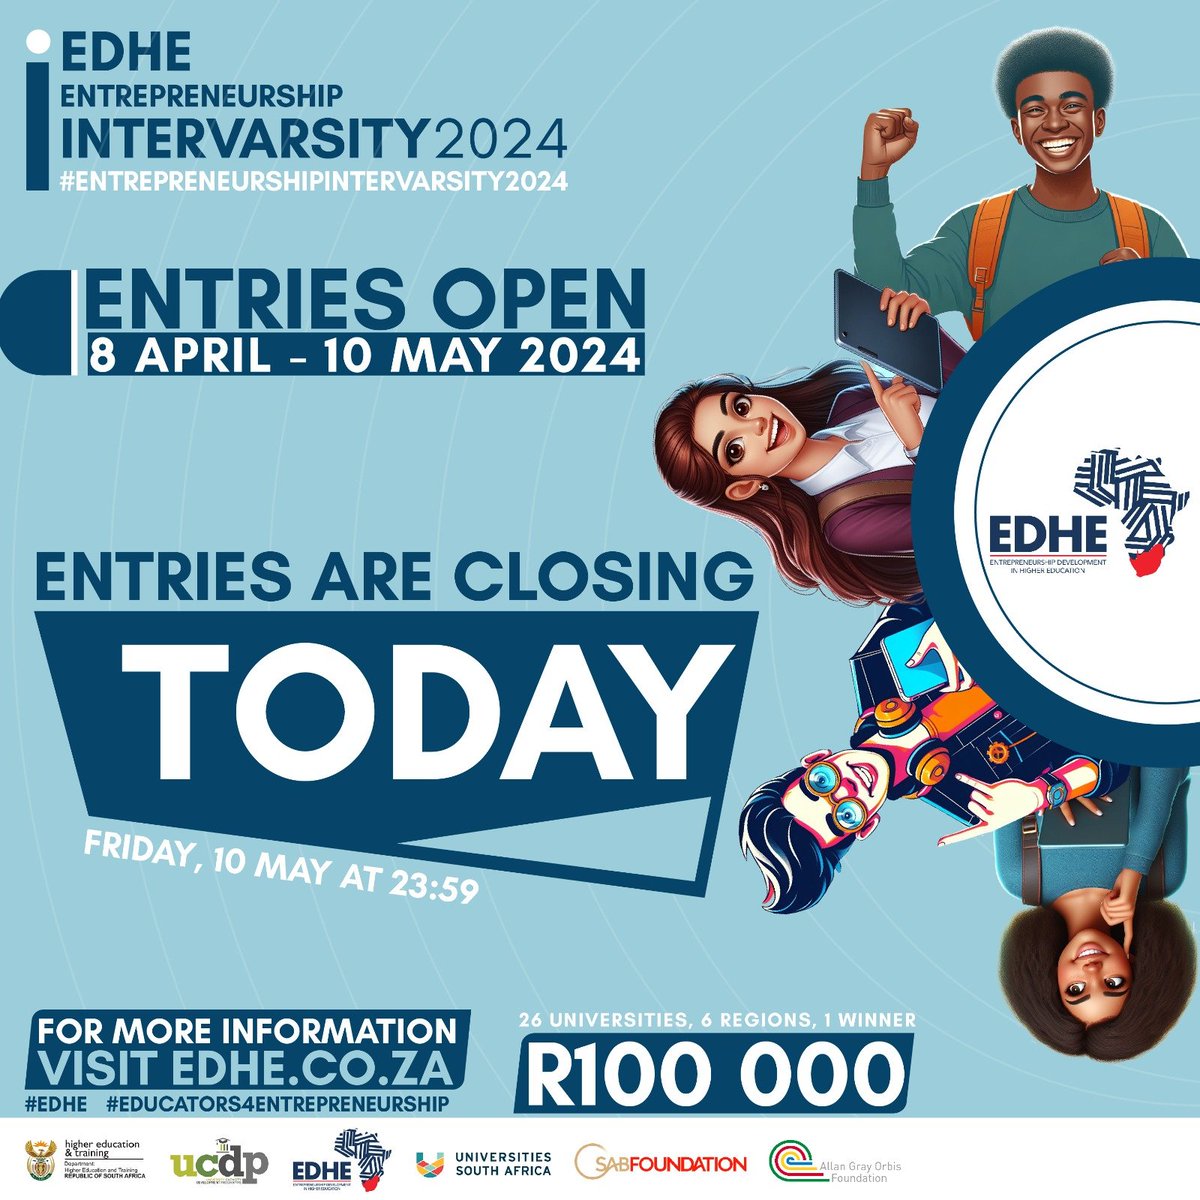 🚀 Don't miss this golden opportunity to compete in this esteemed competition and stand a chance to win *R100,000!* 🏆 # InhlanyeloHub
#Educators4Entrepreneurship @unisa @Unisaradio @unisa